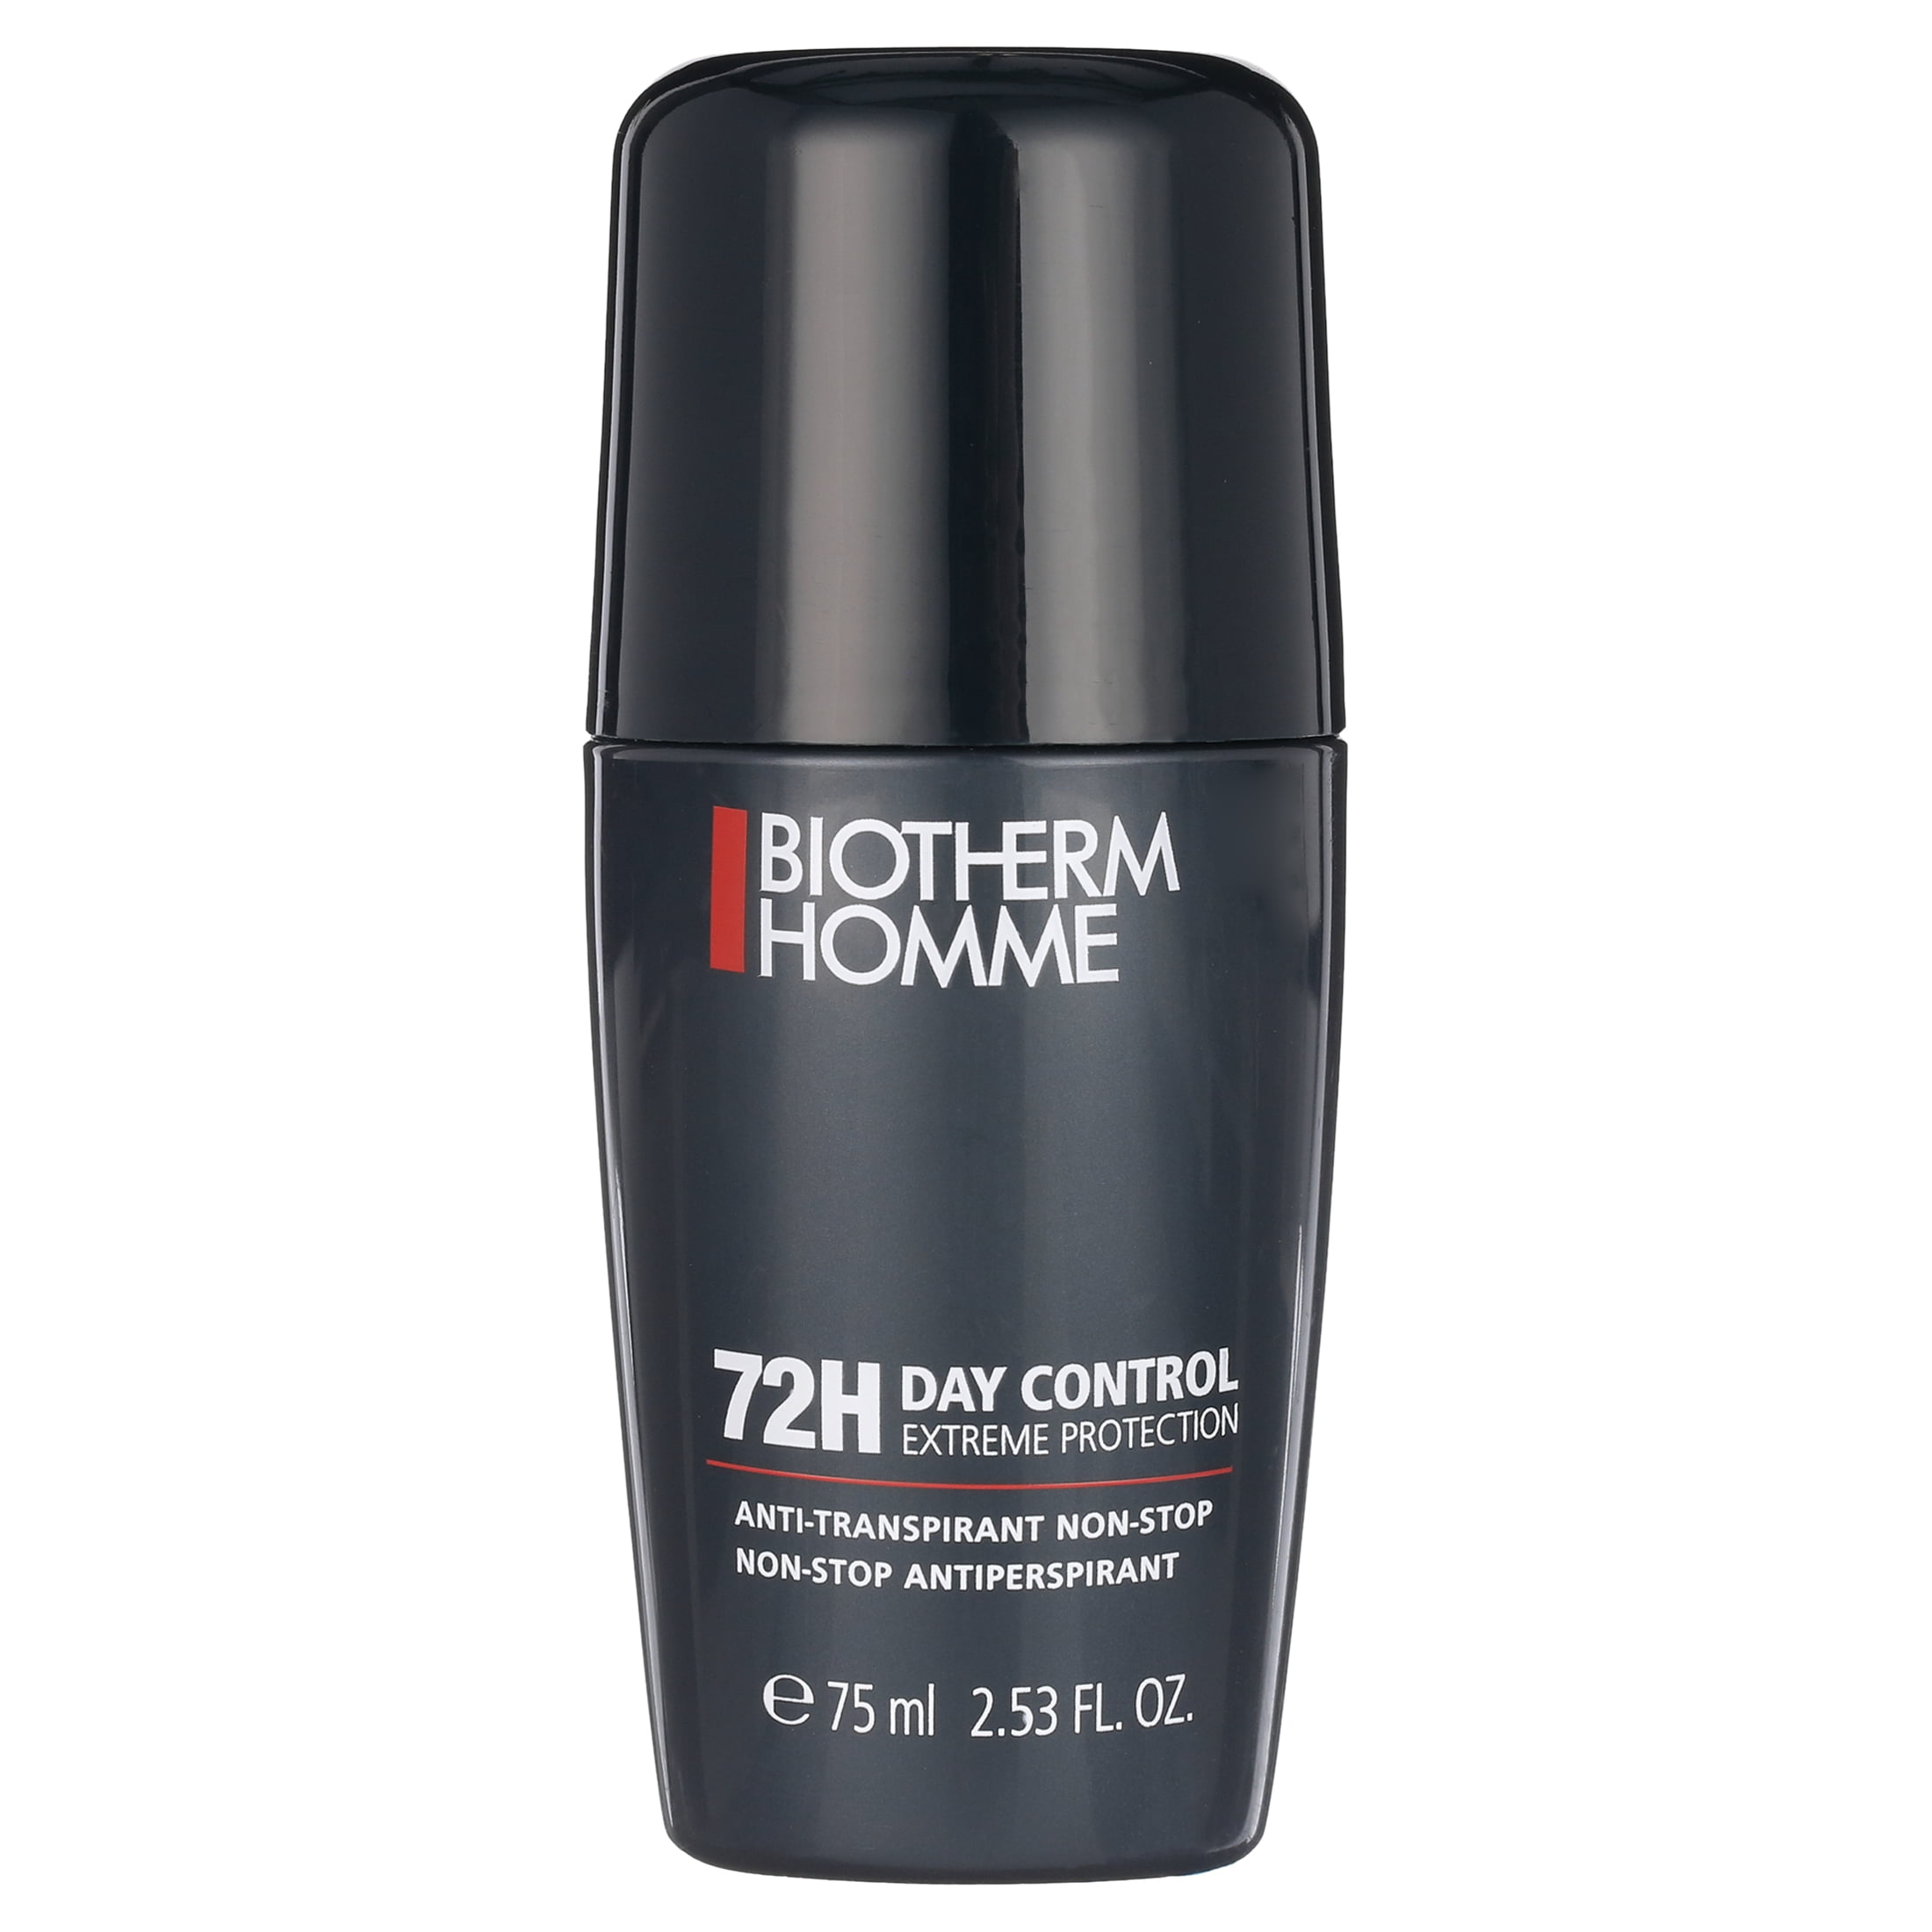 Biotherm Homme Day Control Roll-On, 2.53 oz - Walmart.com